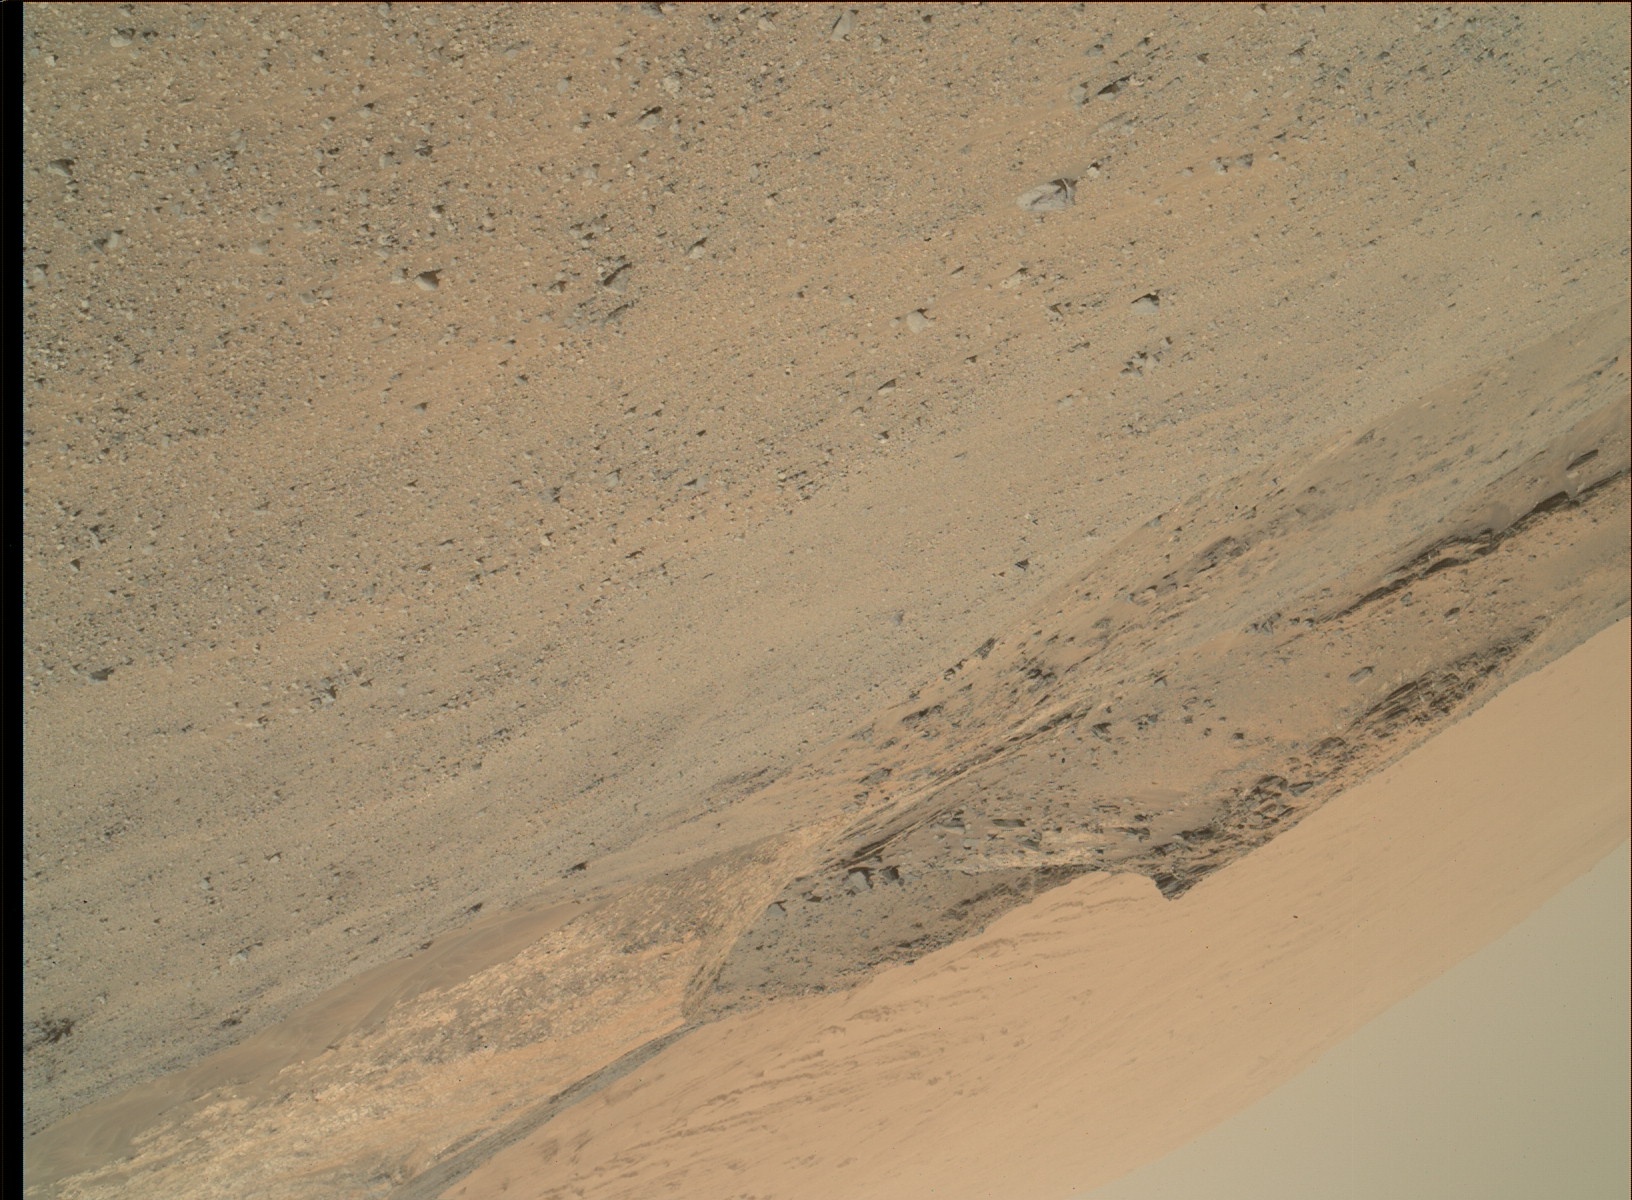 Nasa's Mars rover Curiosity acquired this image using its Mars Hand Lens Imager (MAHLI) on Sol 963